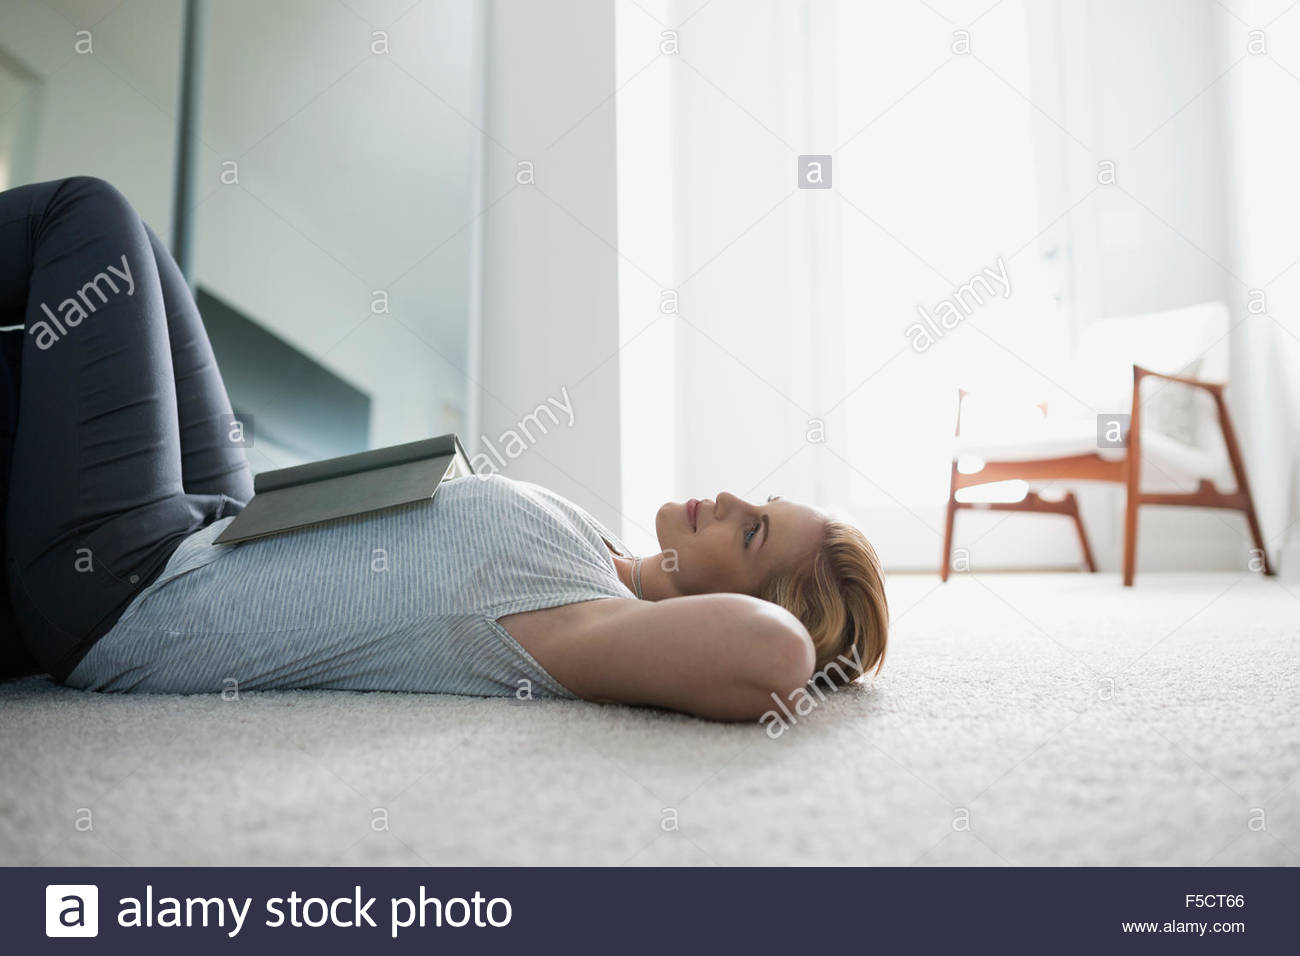 Serene woman with book, laying on bedroom floor Stock Photo